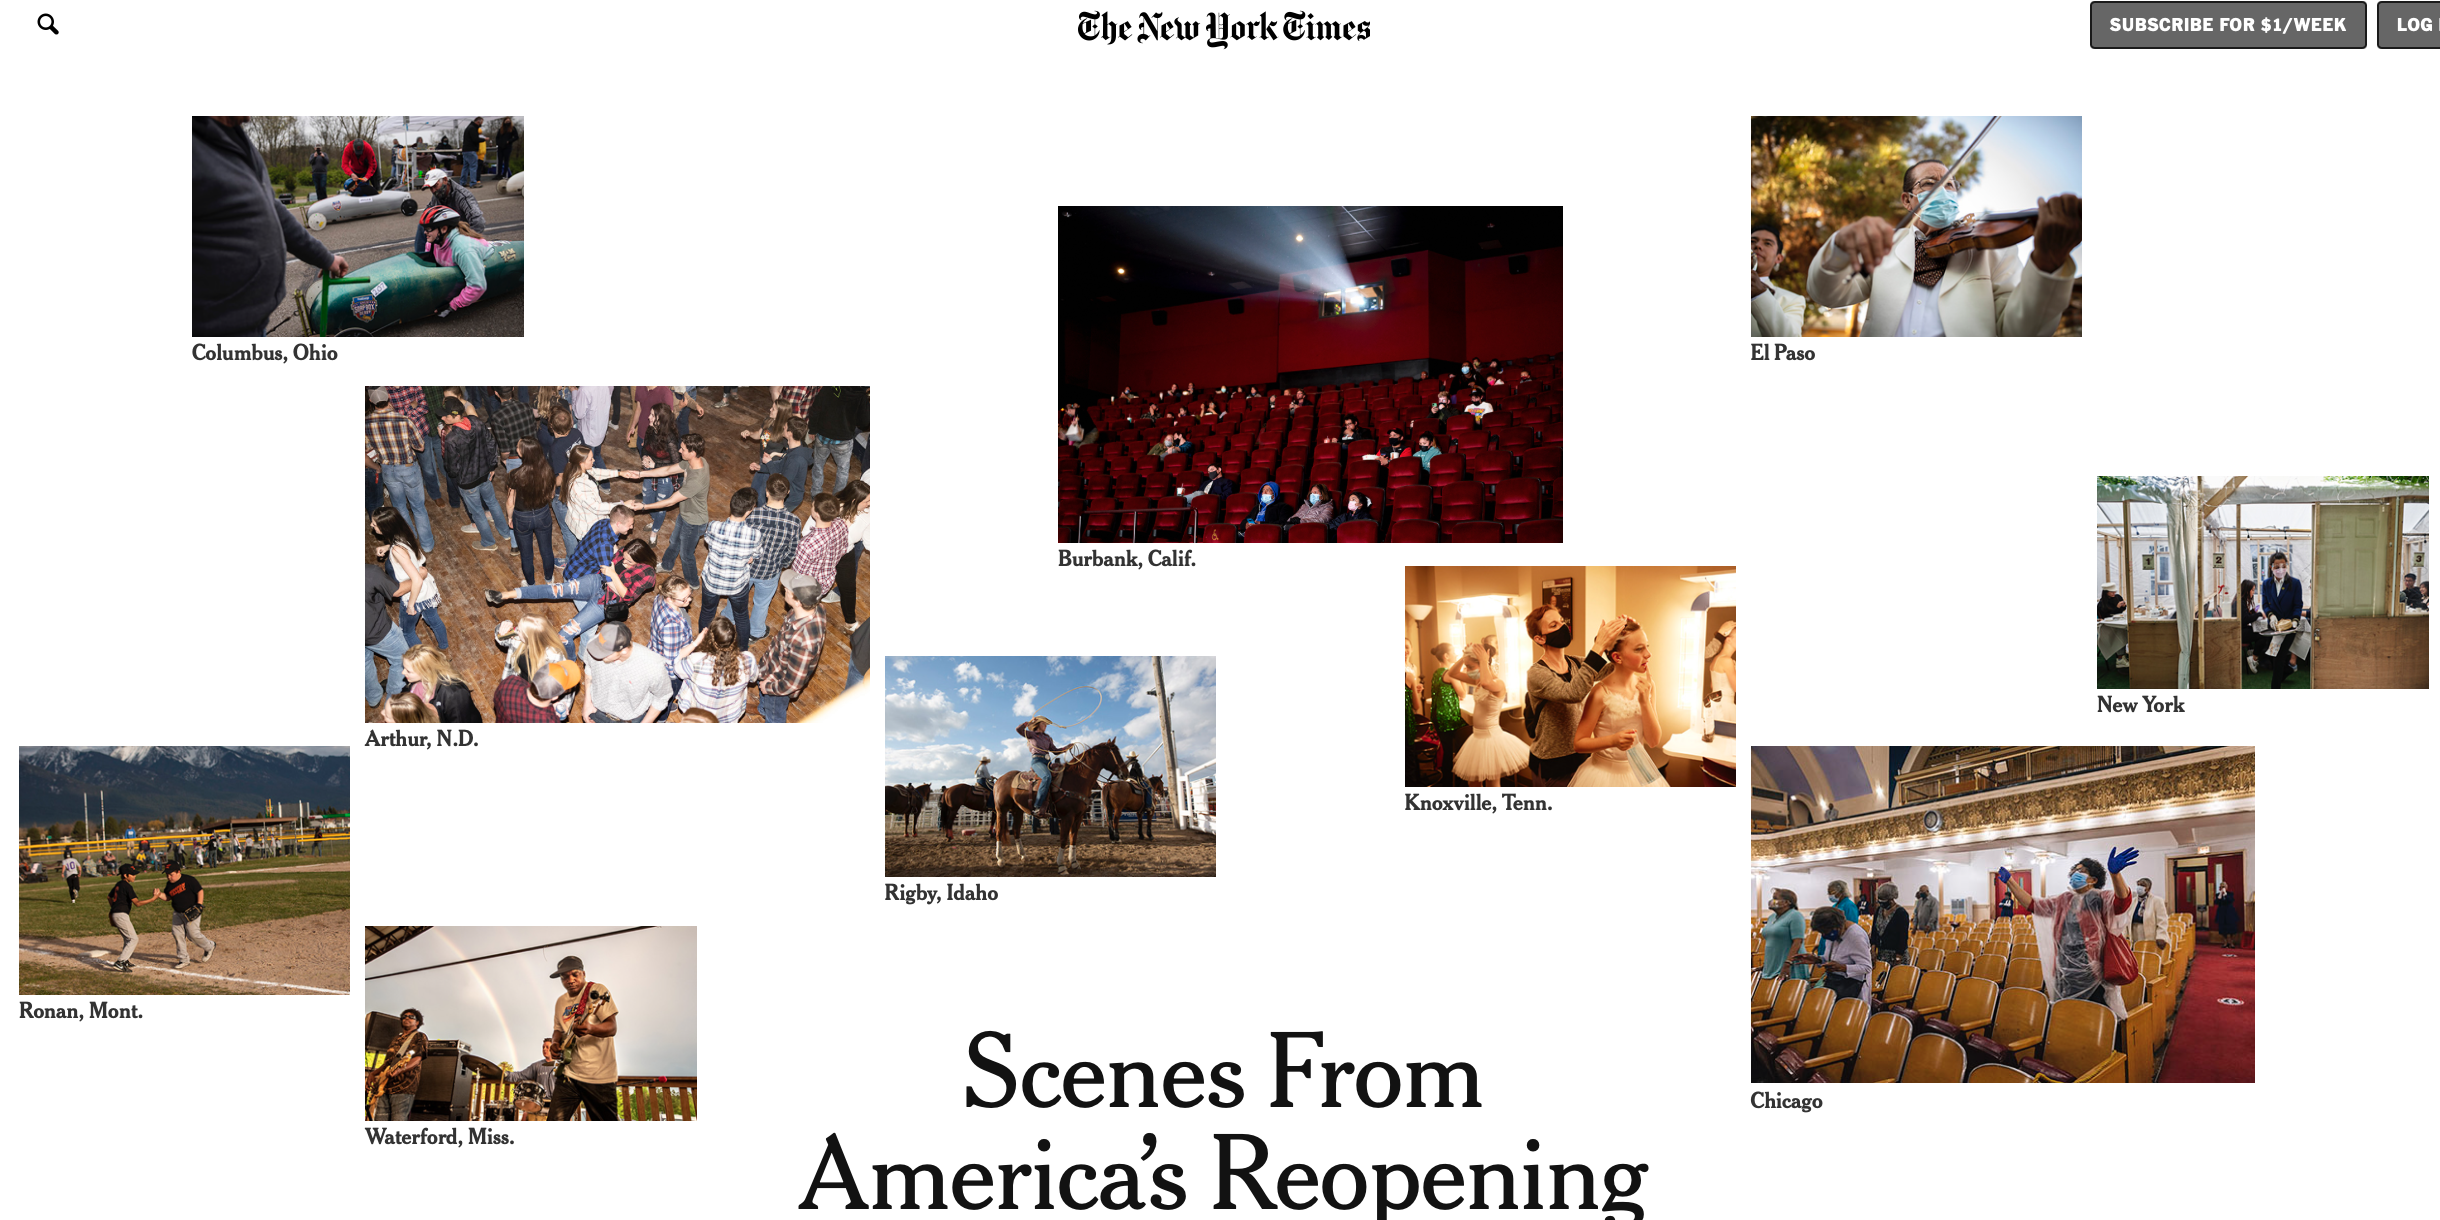 NYT: Scenes From America's Reopening